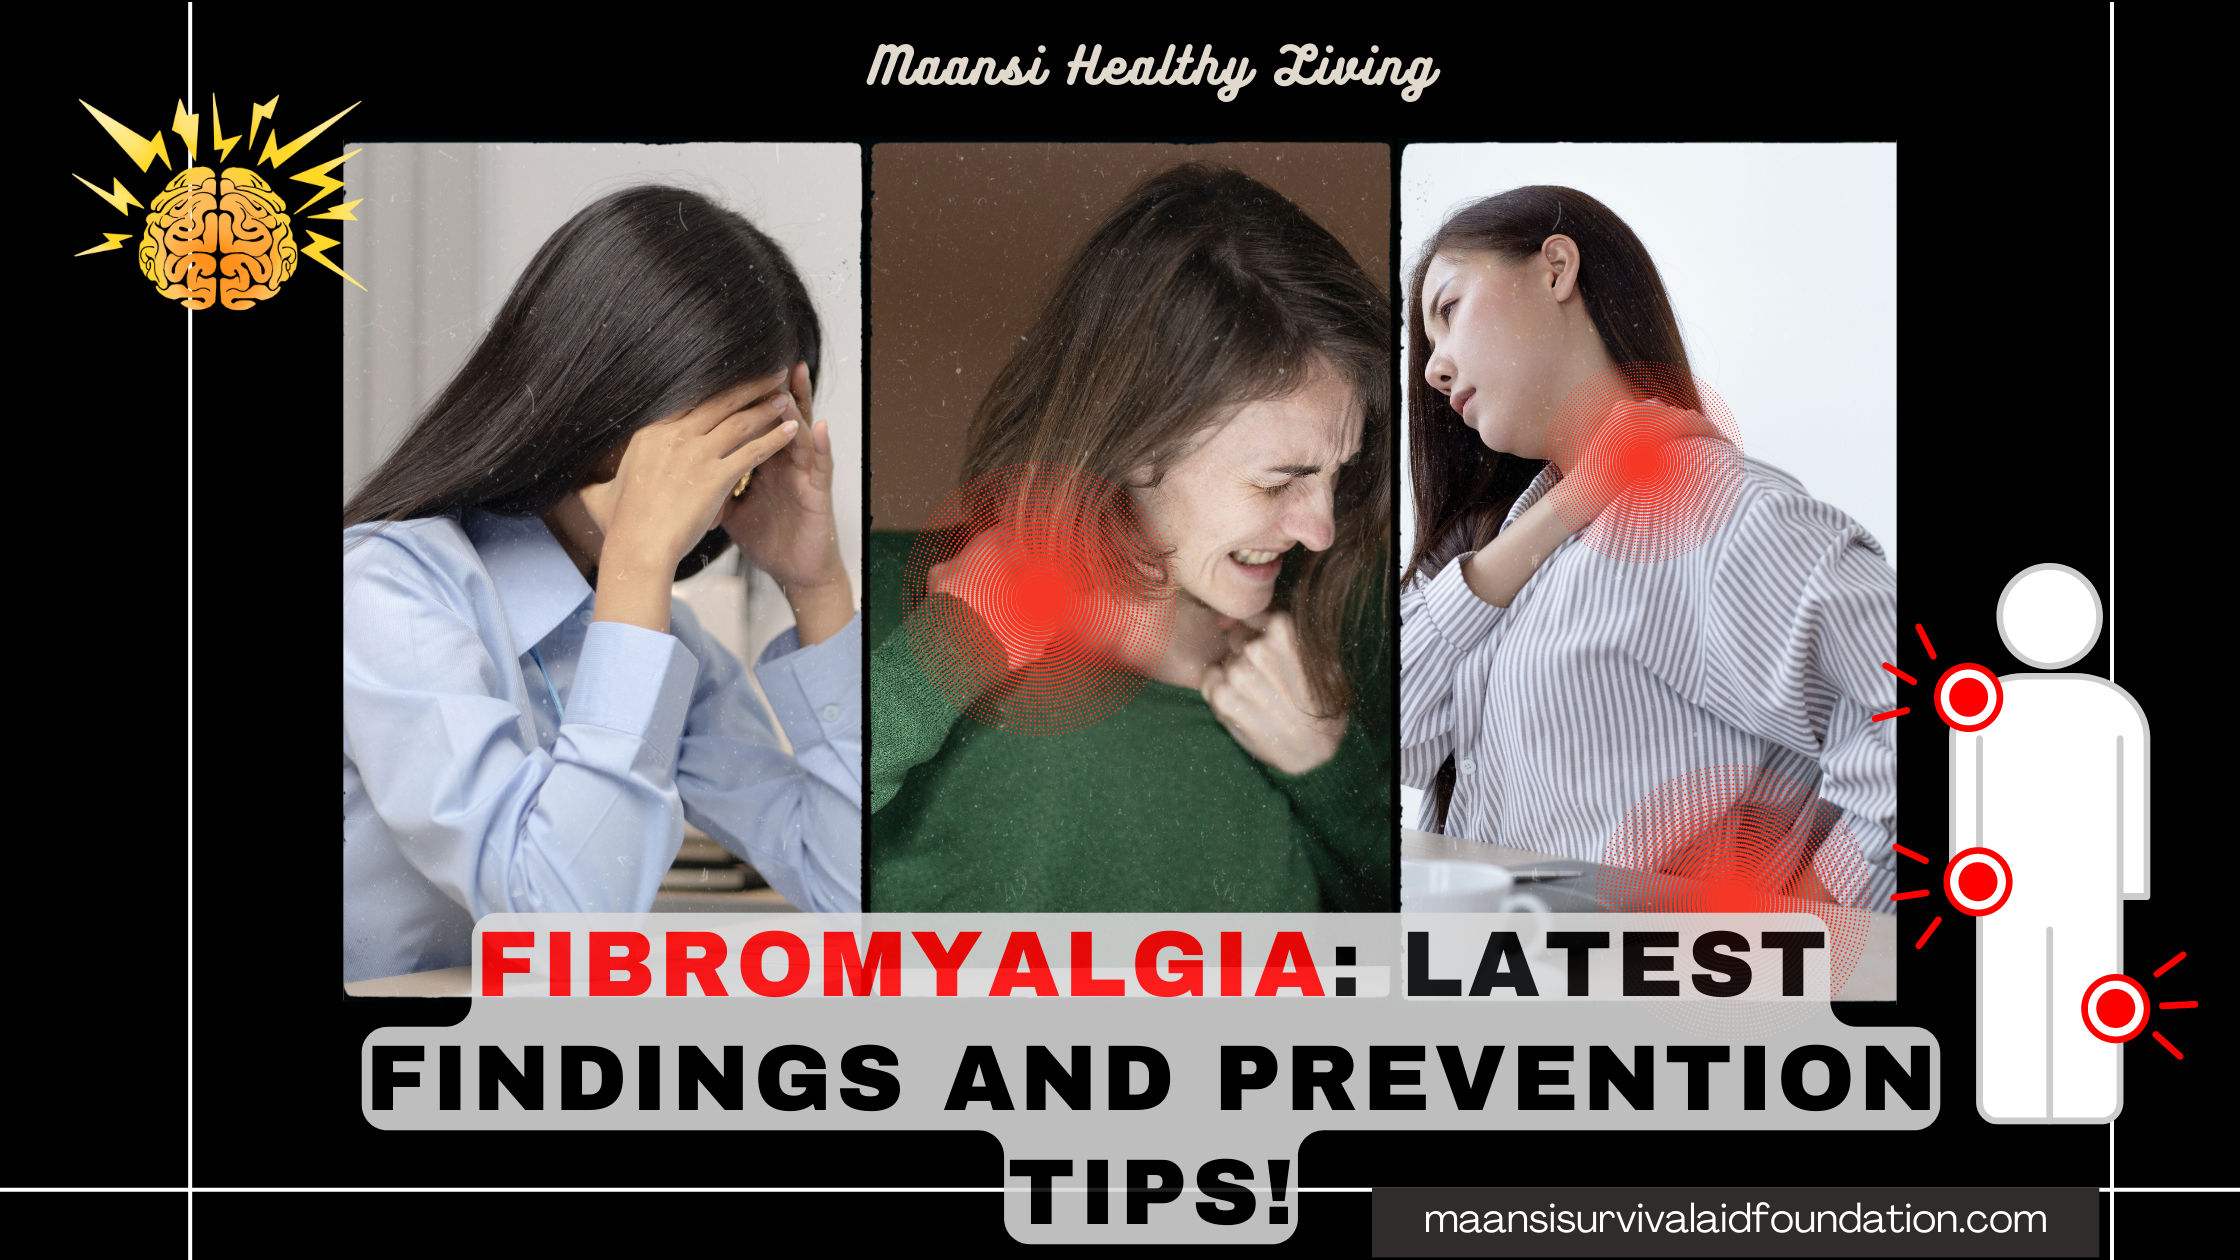 Fibromyalgia: Latest Findings and prevention tips!